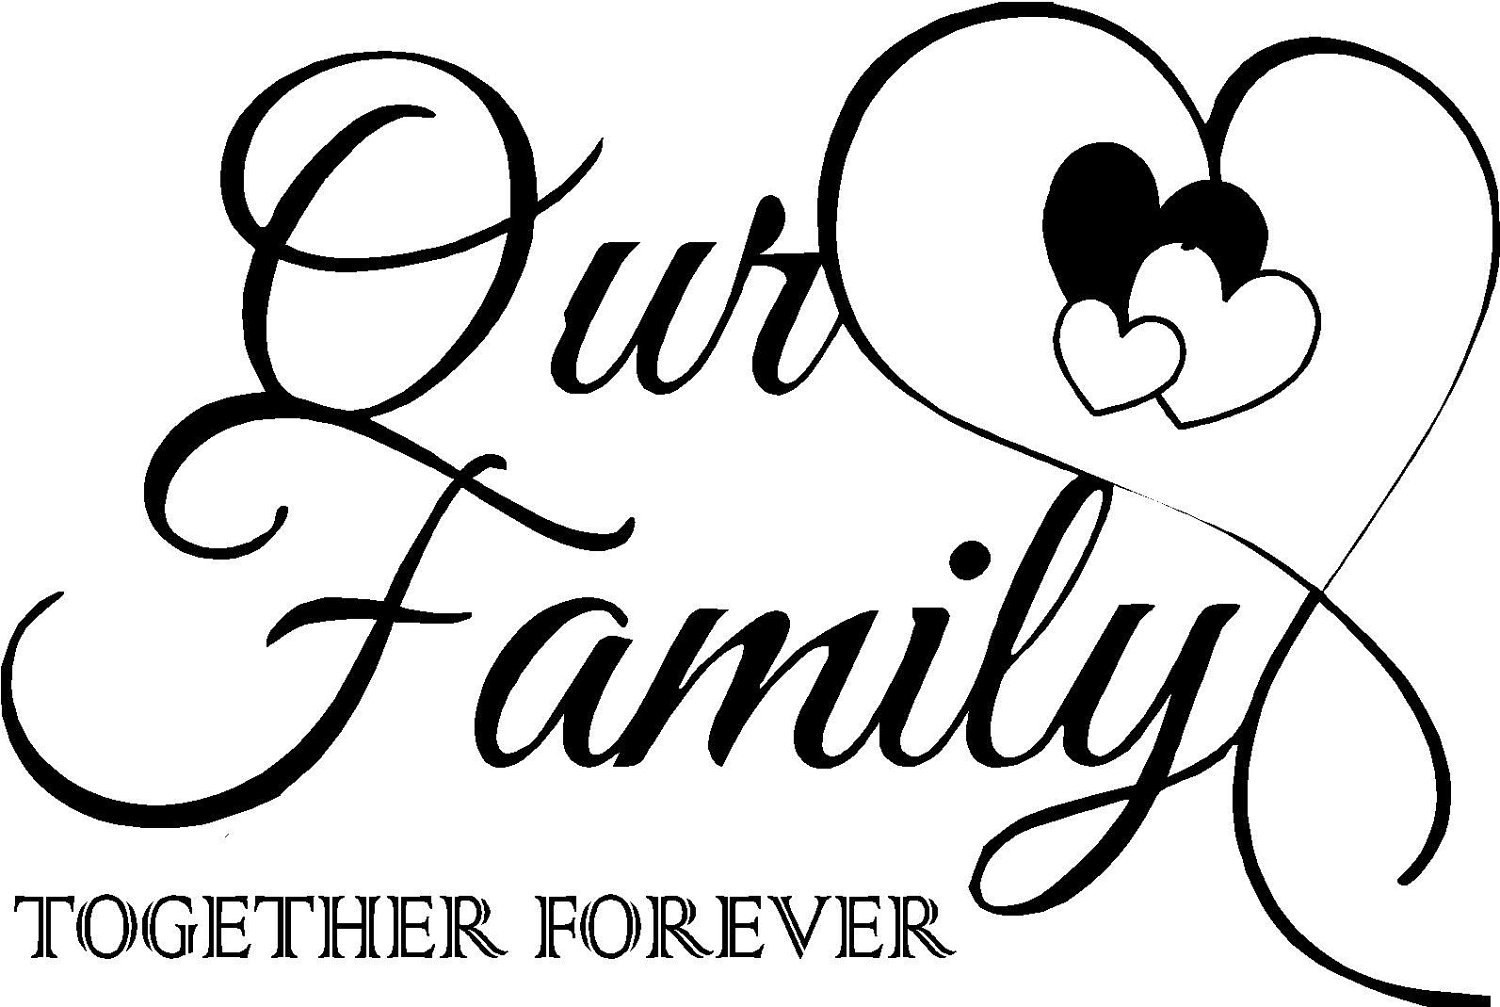 Family Together Quotes
 Quote Our family to her forever with by vinylforall on Etsy